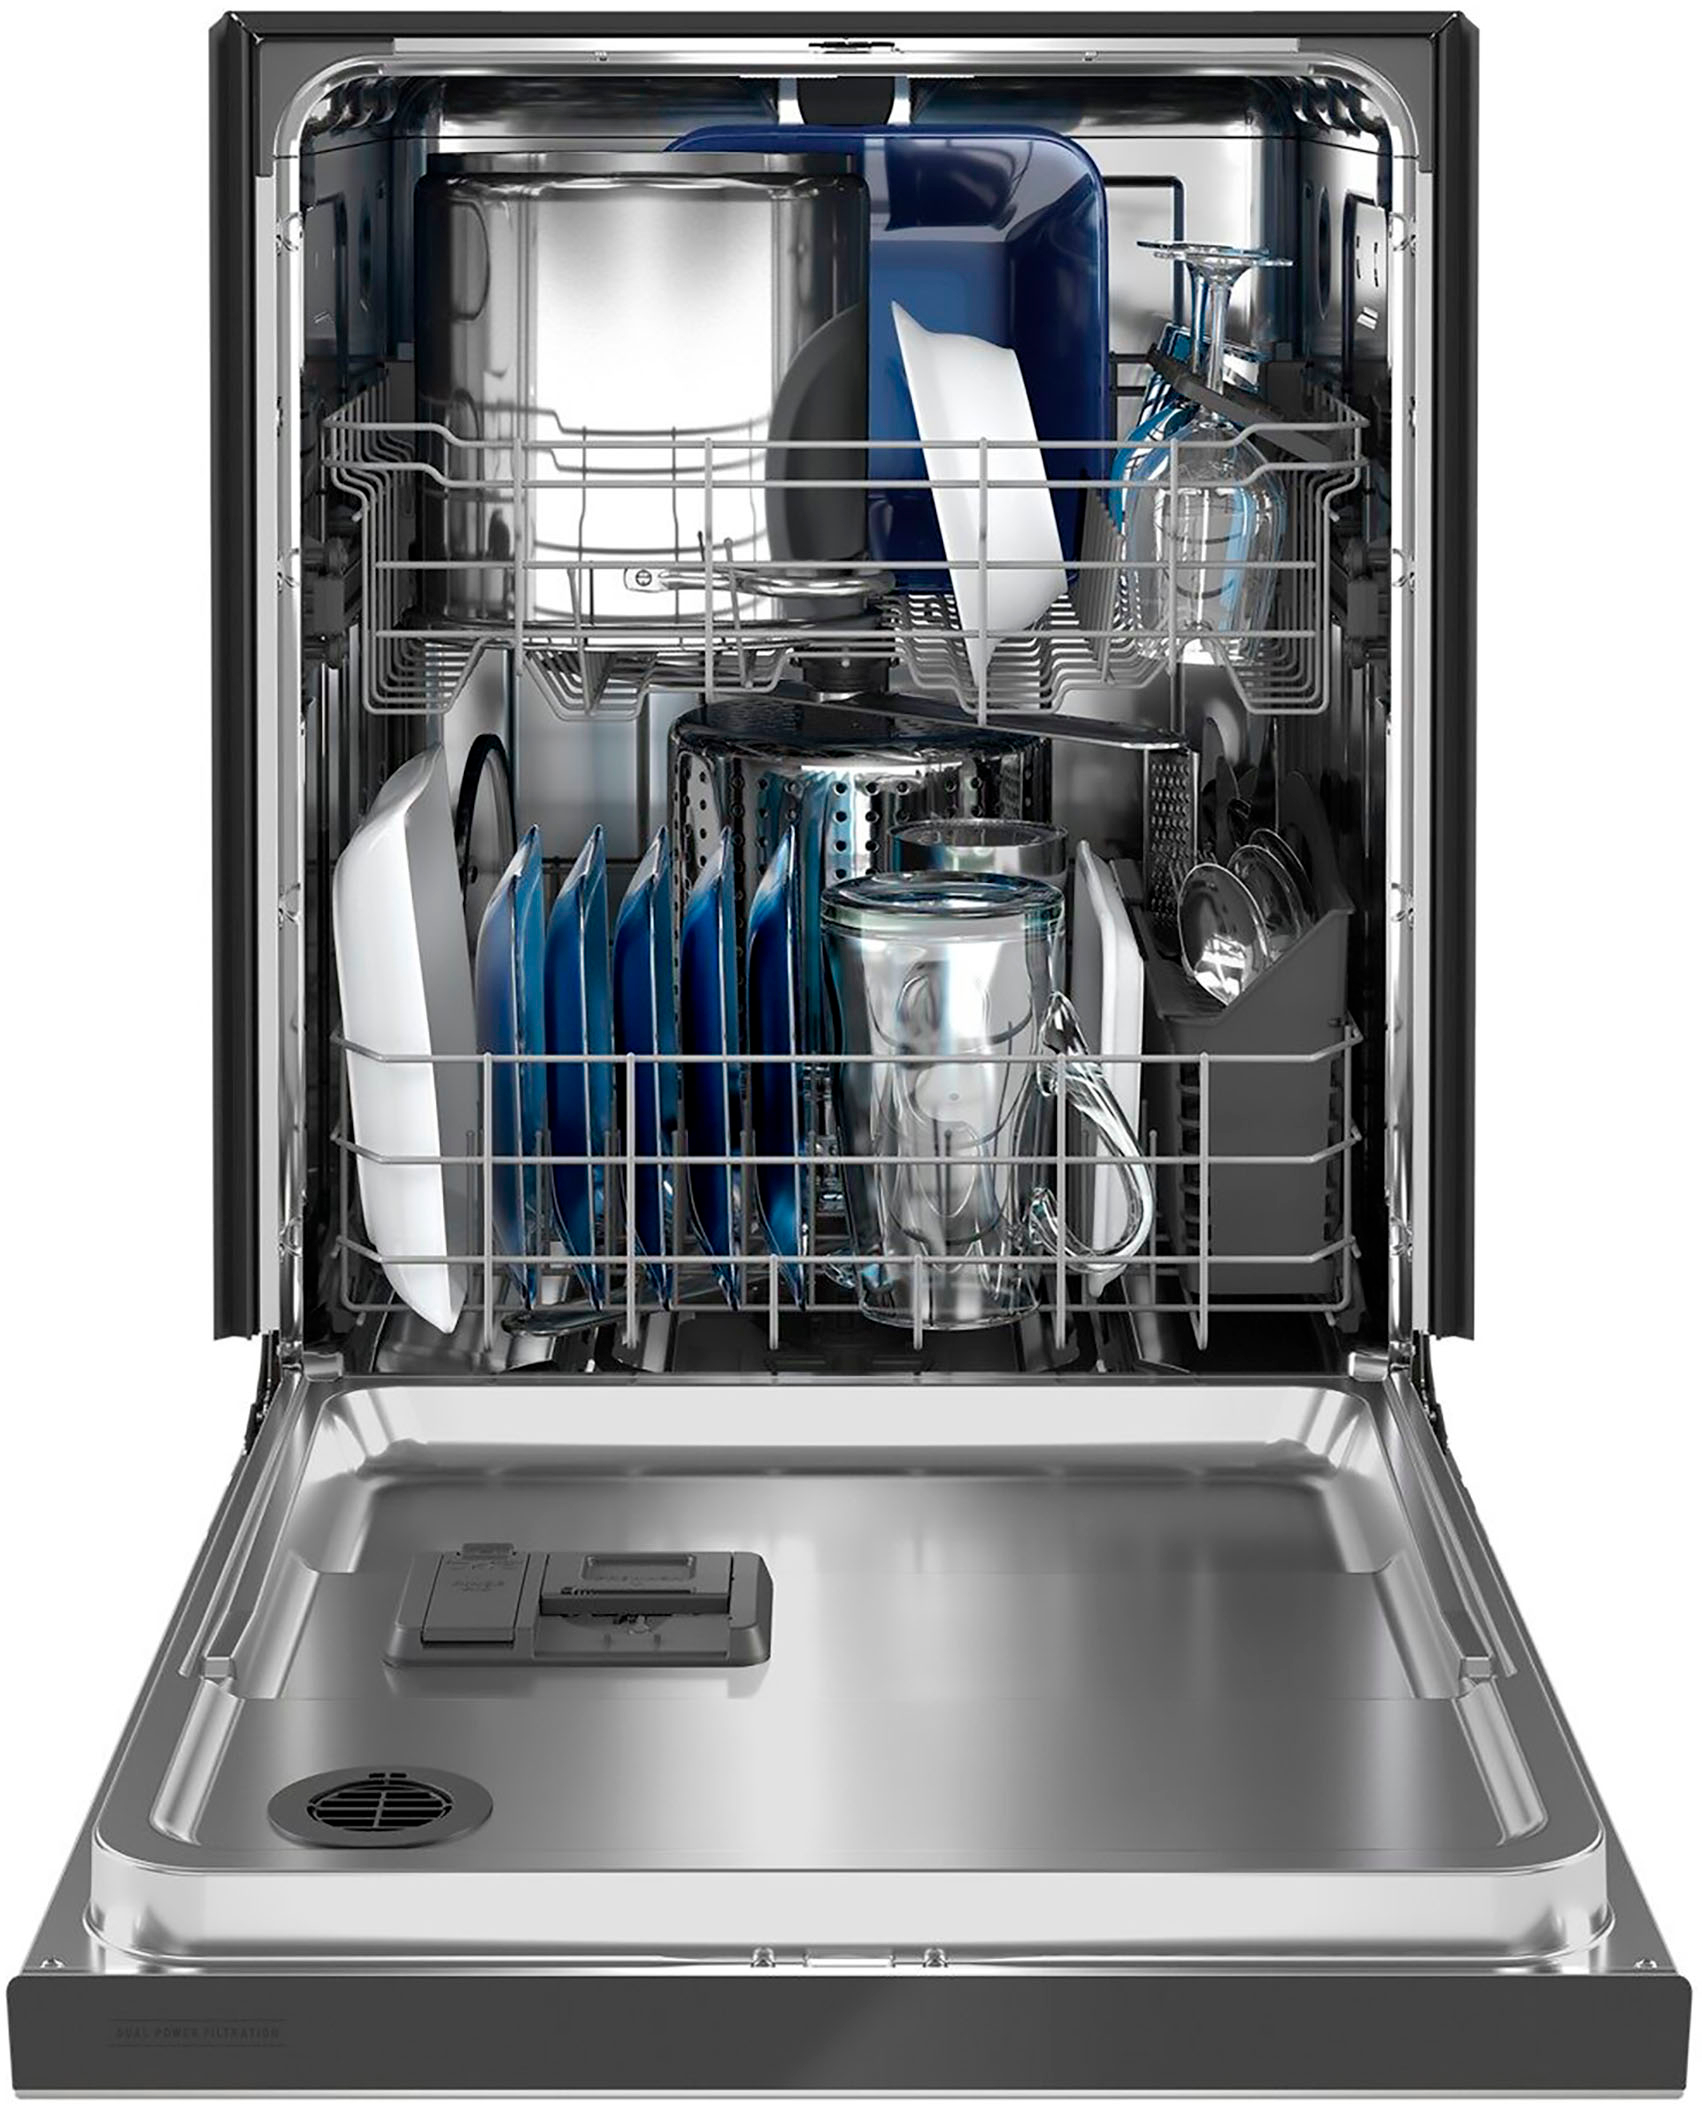 Left View: GE - Stainless Steel Interior Fingerprint Resistant Dishwasher with Hidden Controls - Stainless steel